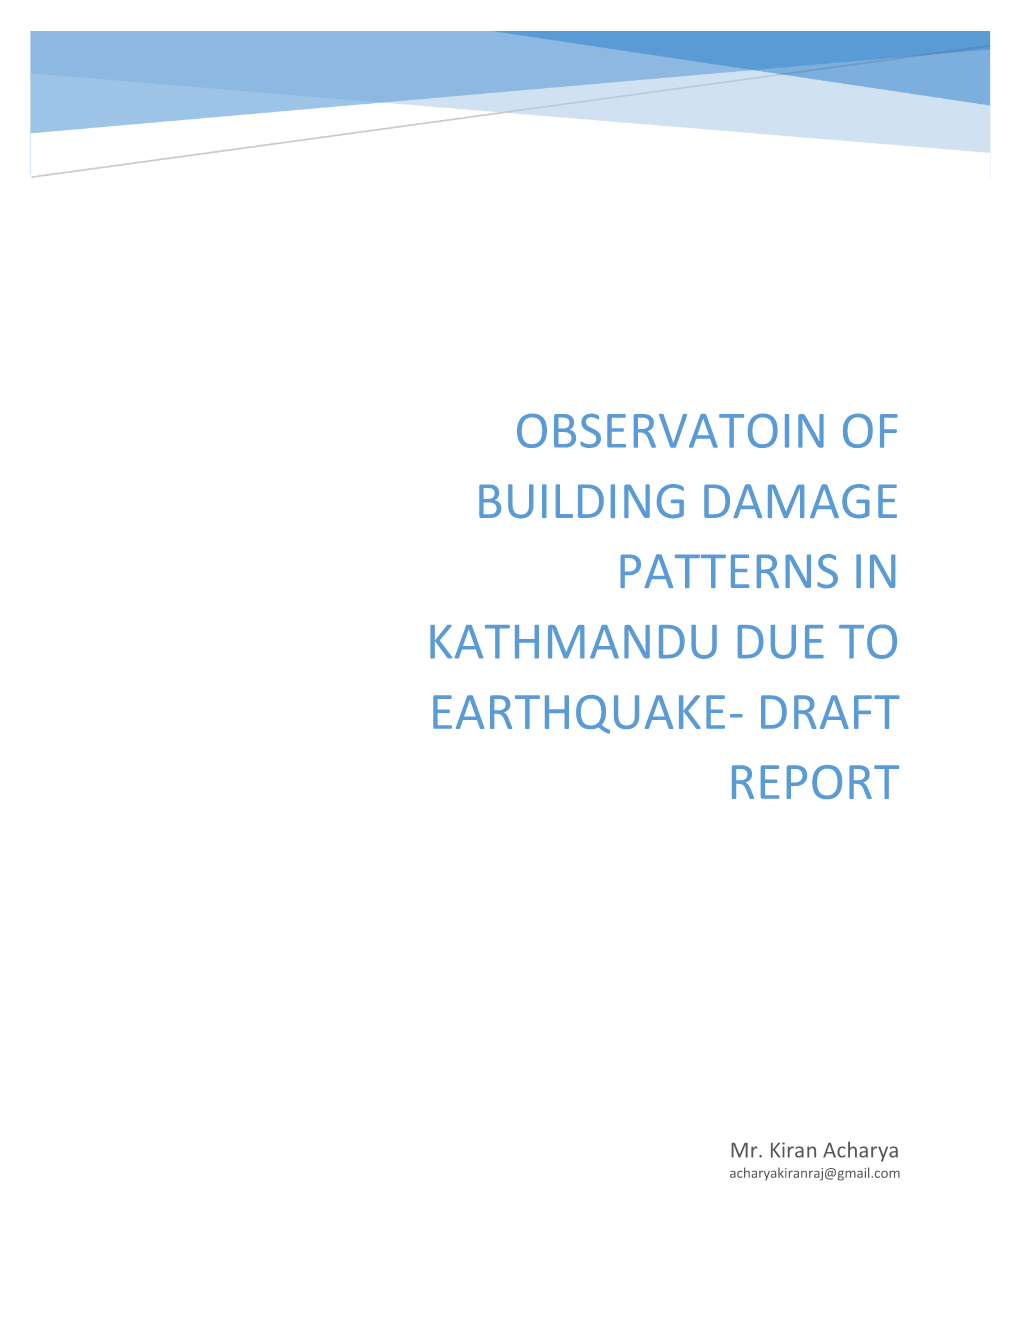 Observatoin of Building Damage Patterns in Kathmandu Due to Earthquake- Draft Report